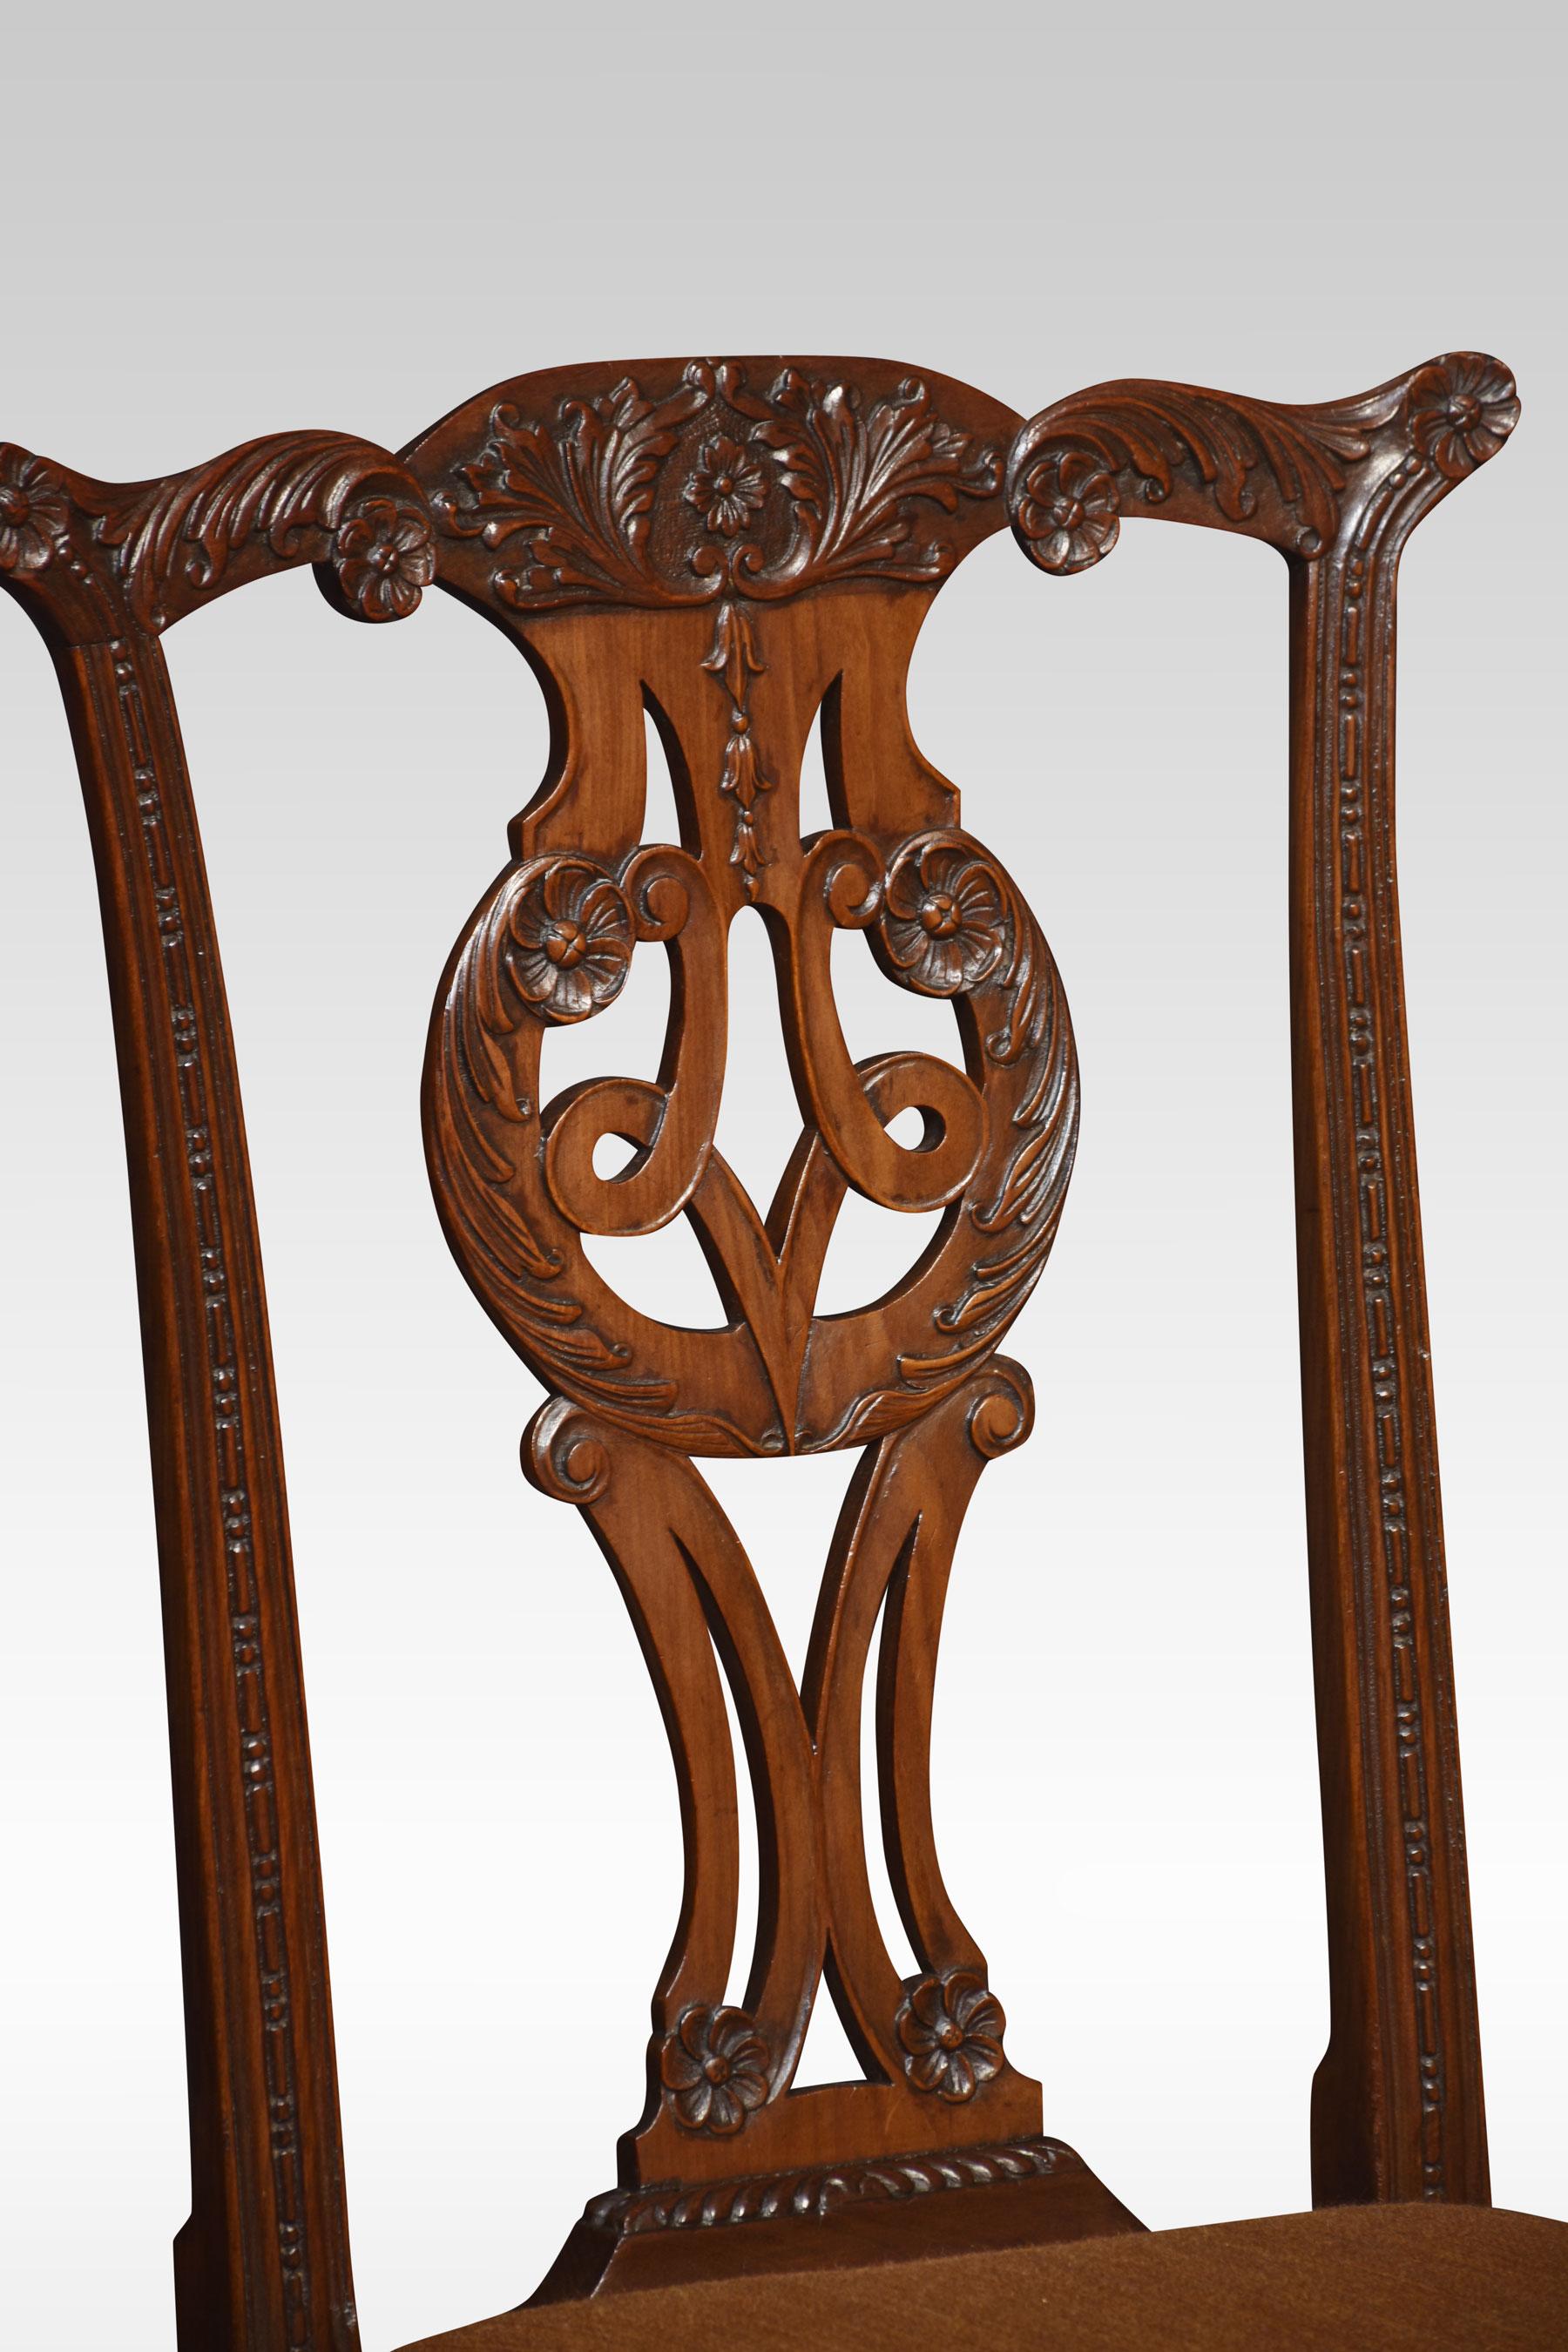 Pair of mahogany side chairs, each with a yoked crest rail above a pierced splat with quatrefoil cut-outs over a drop-in seat. All raised up on cabriole supports terminating in claw and ball feet.
Dimensions
Height 38 Inches height to seat 18